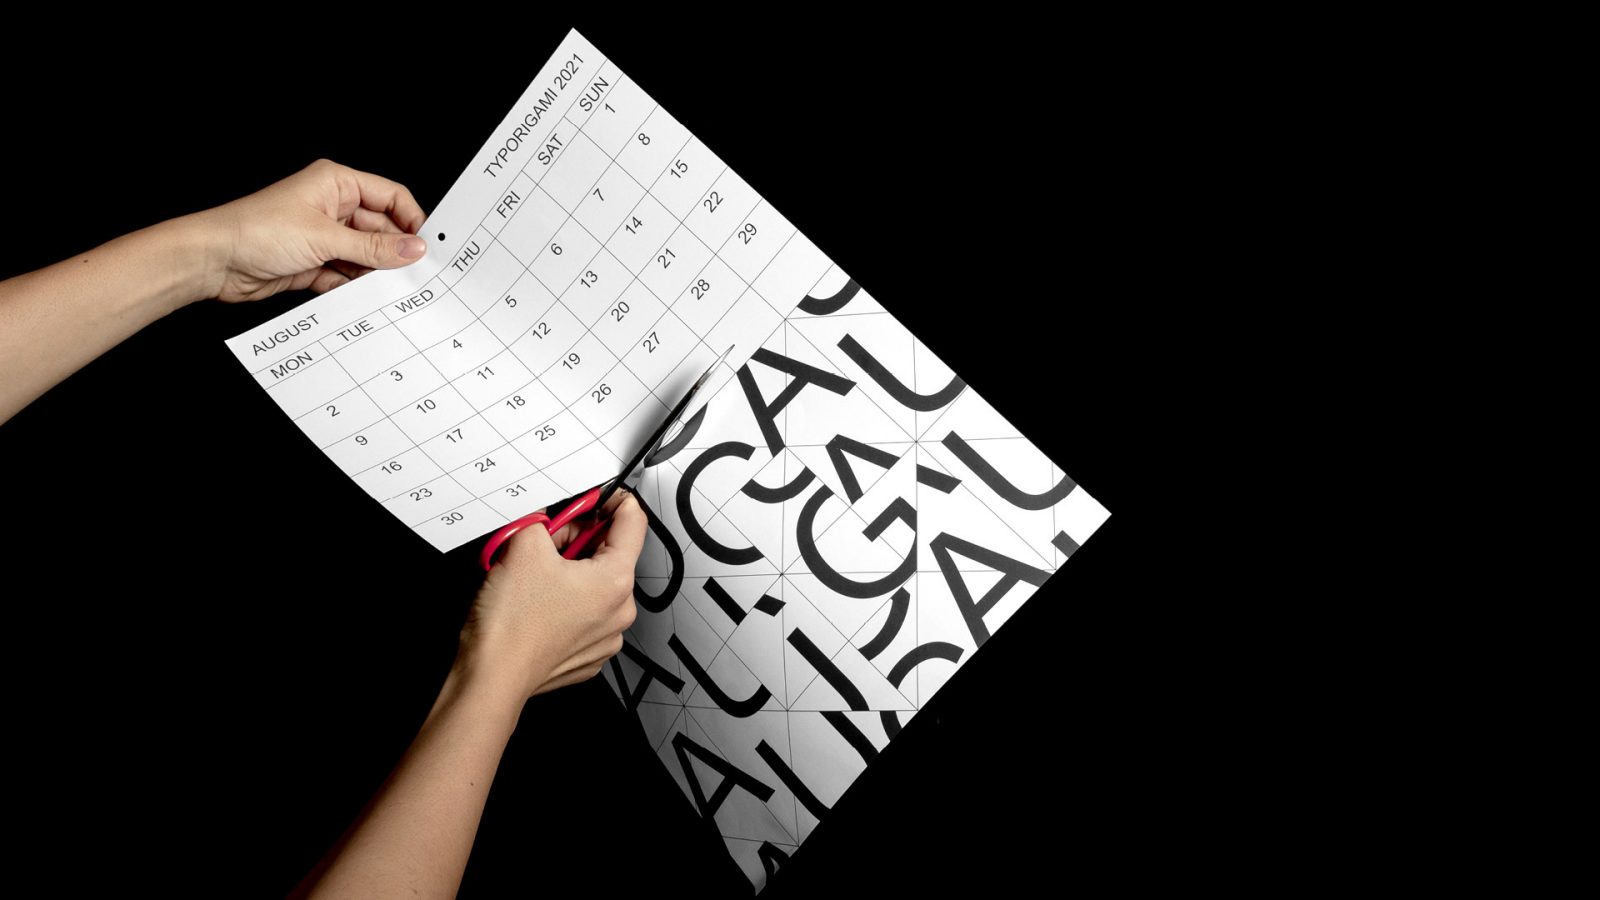 Typorigami Calendar 2021 invites the user to play, with each month including a new origami to try